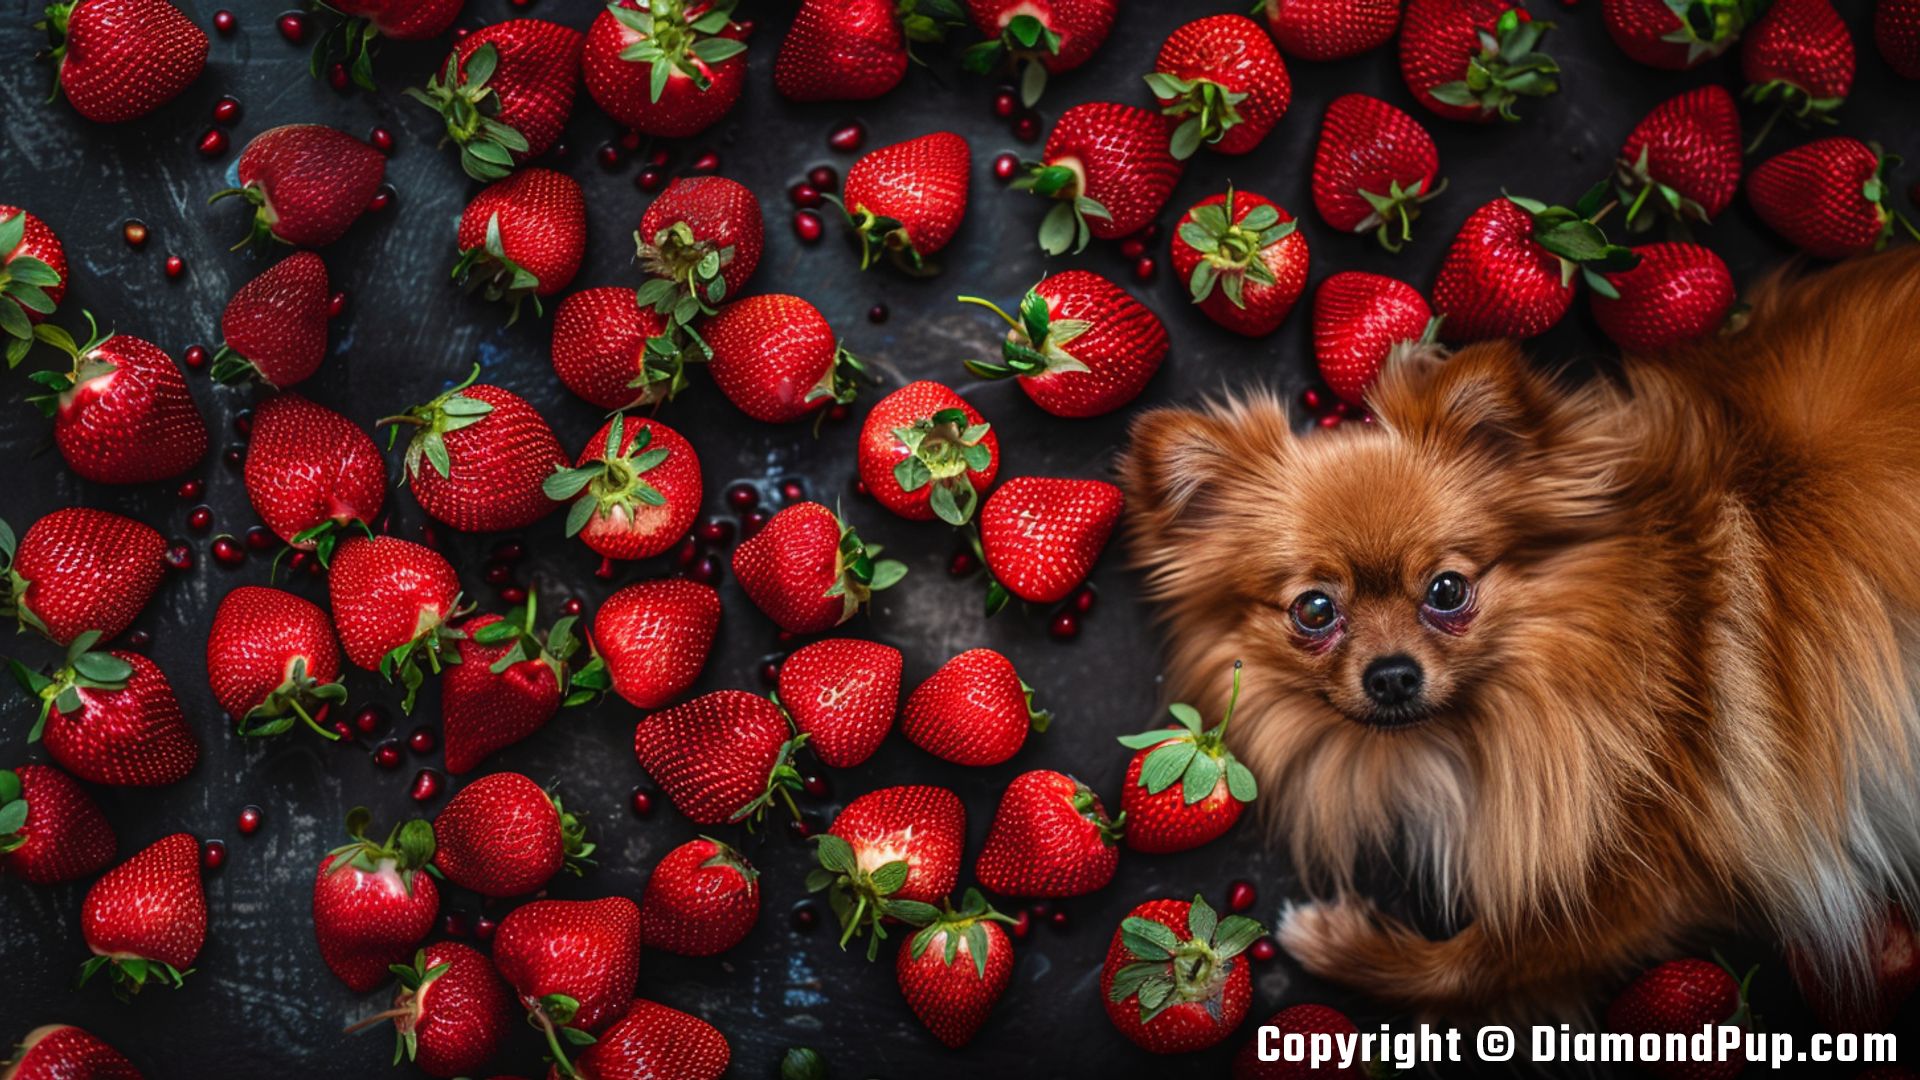 Photo of an Adorable Pomeranian Eating Strawberries